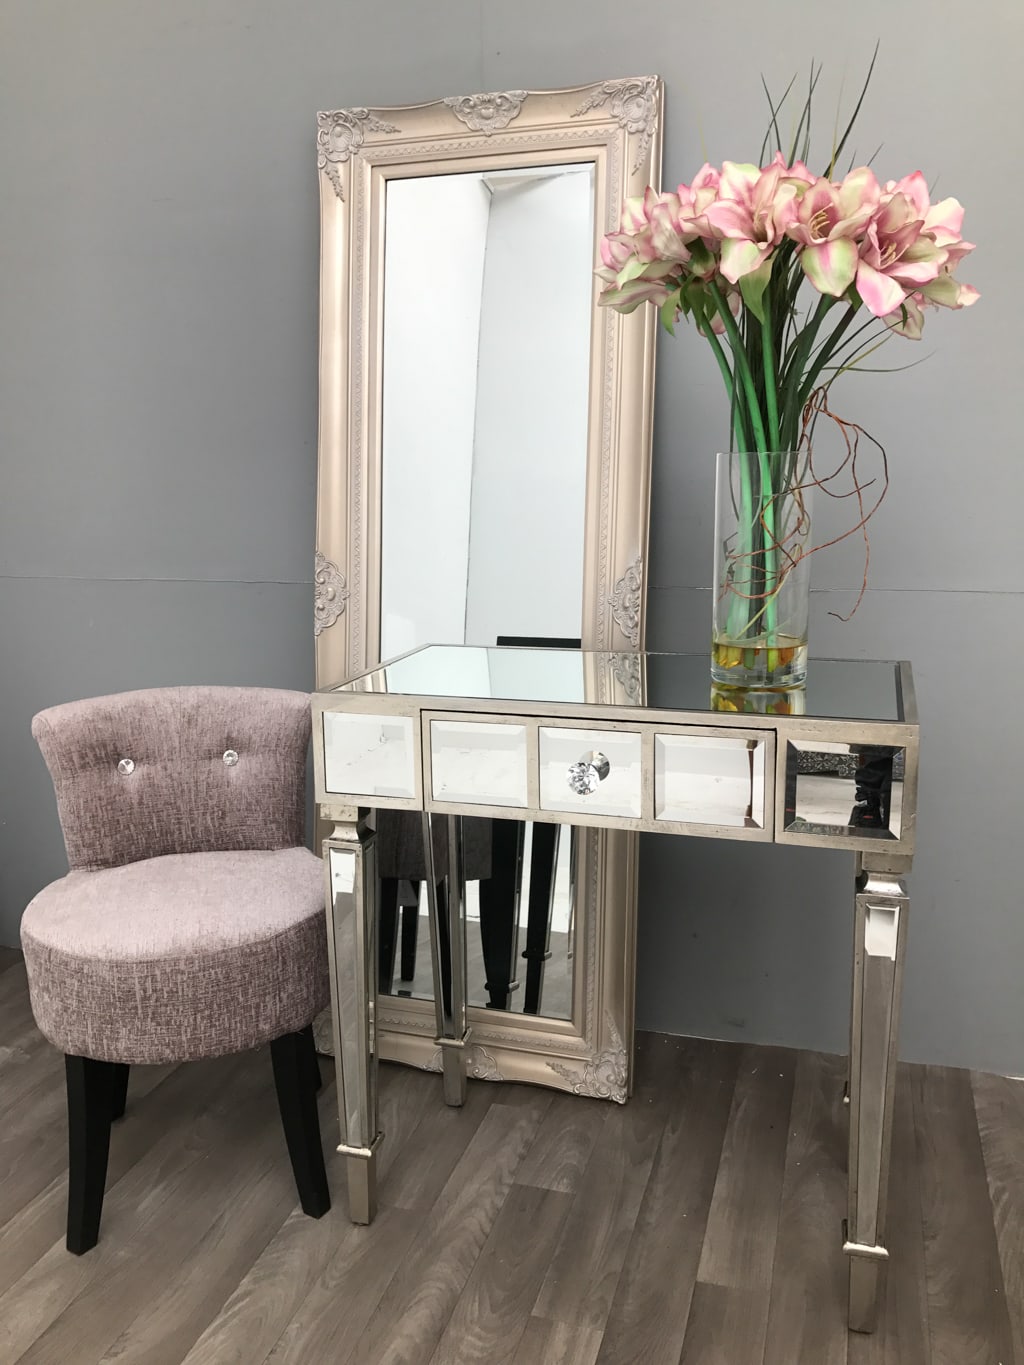 Mirrored Console Table With Single Drawer - Modern Finish Hollywood